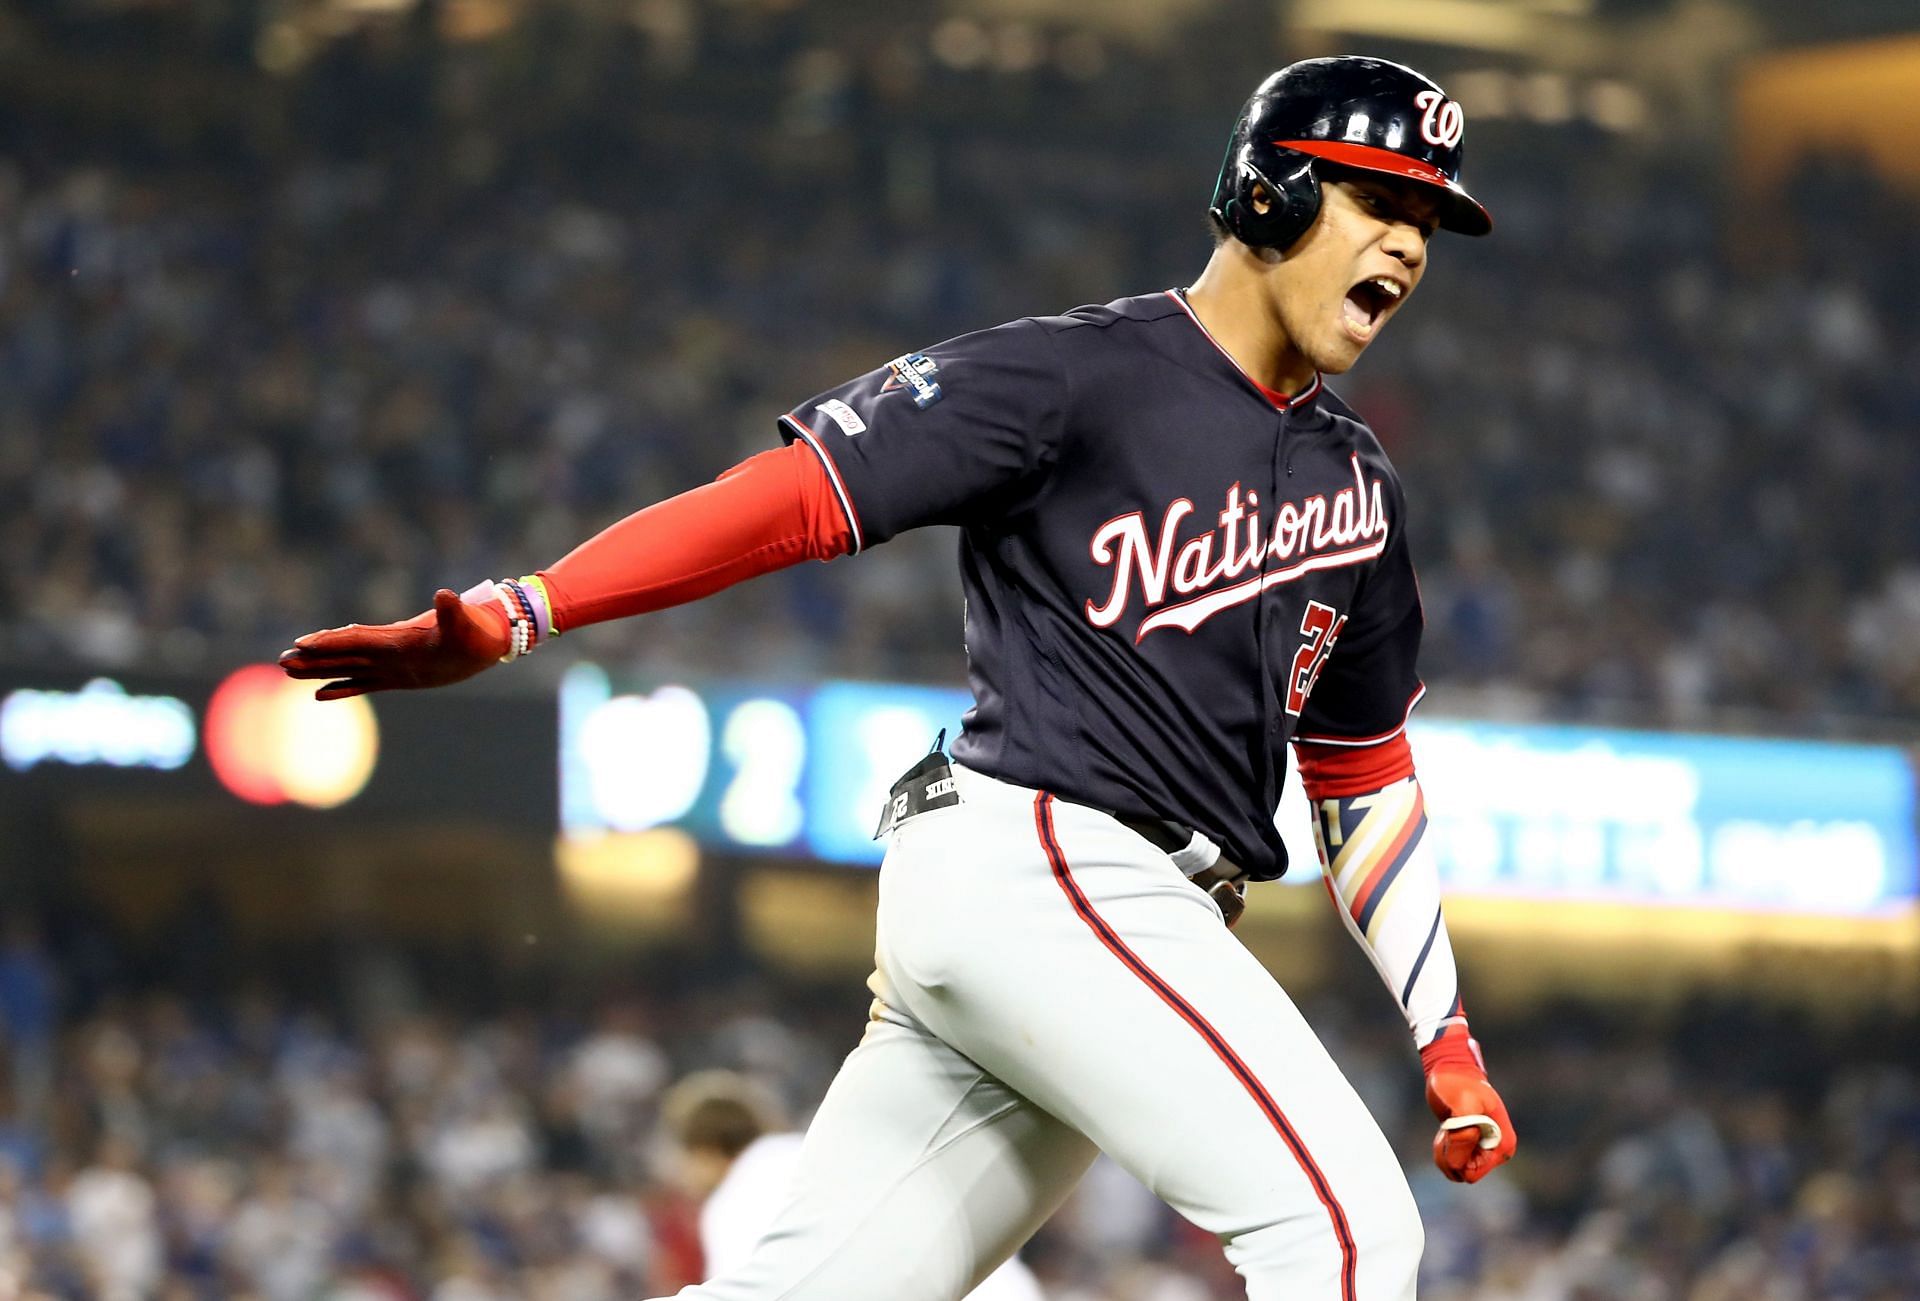 The Washington Nationals are in the middle of a rebuild